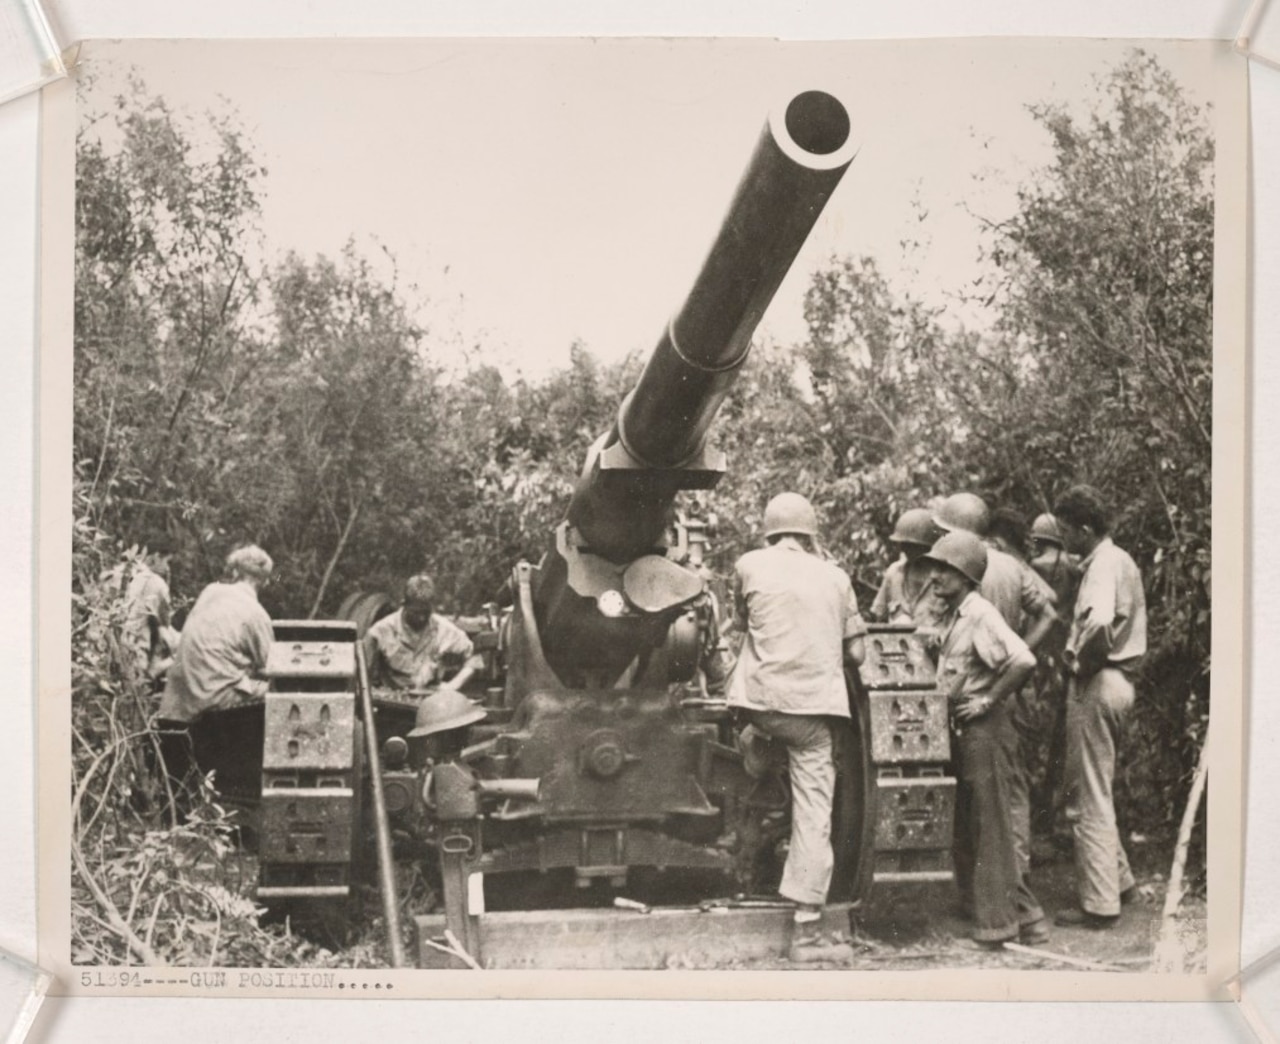 A handful of Marines work on a massive 155 mm gun surrounded by jungle